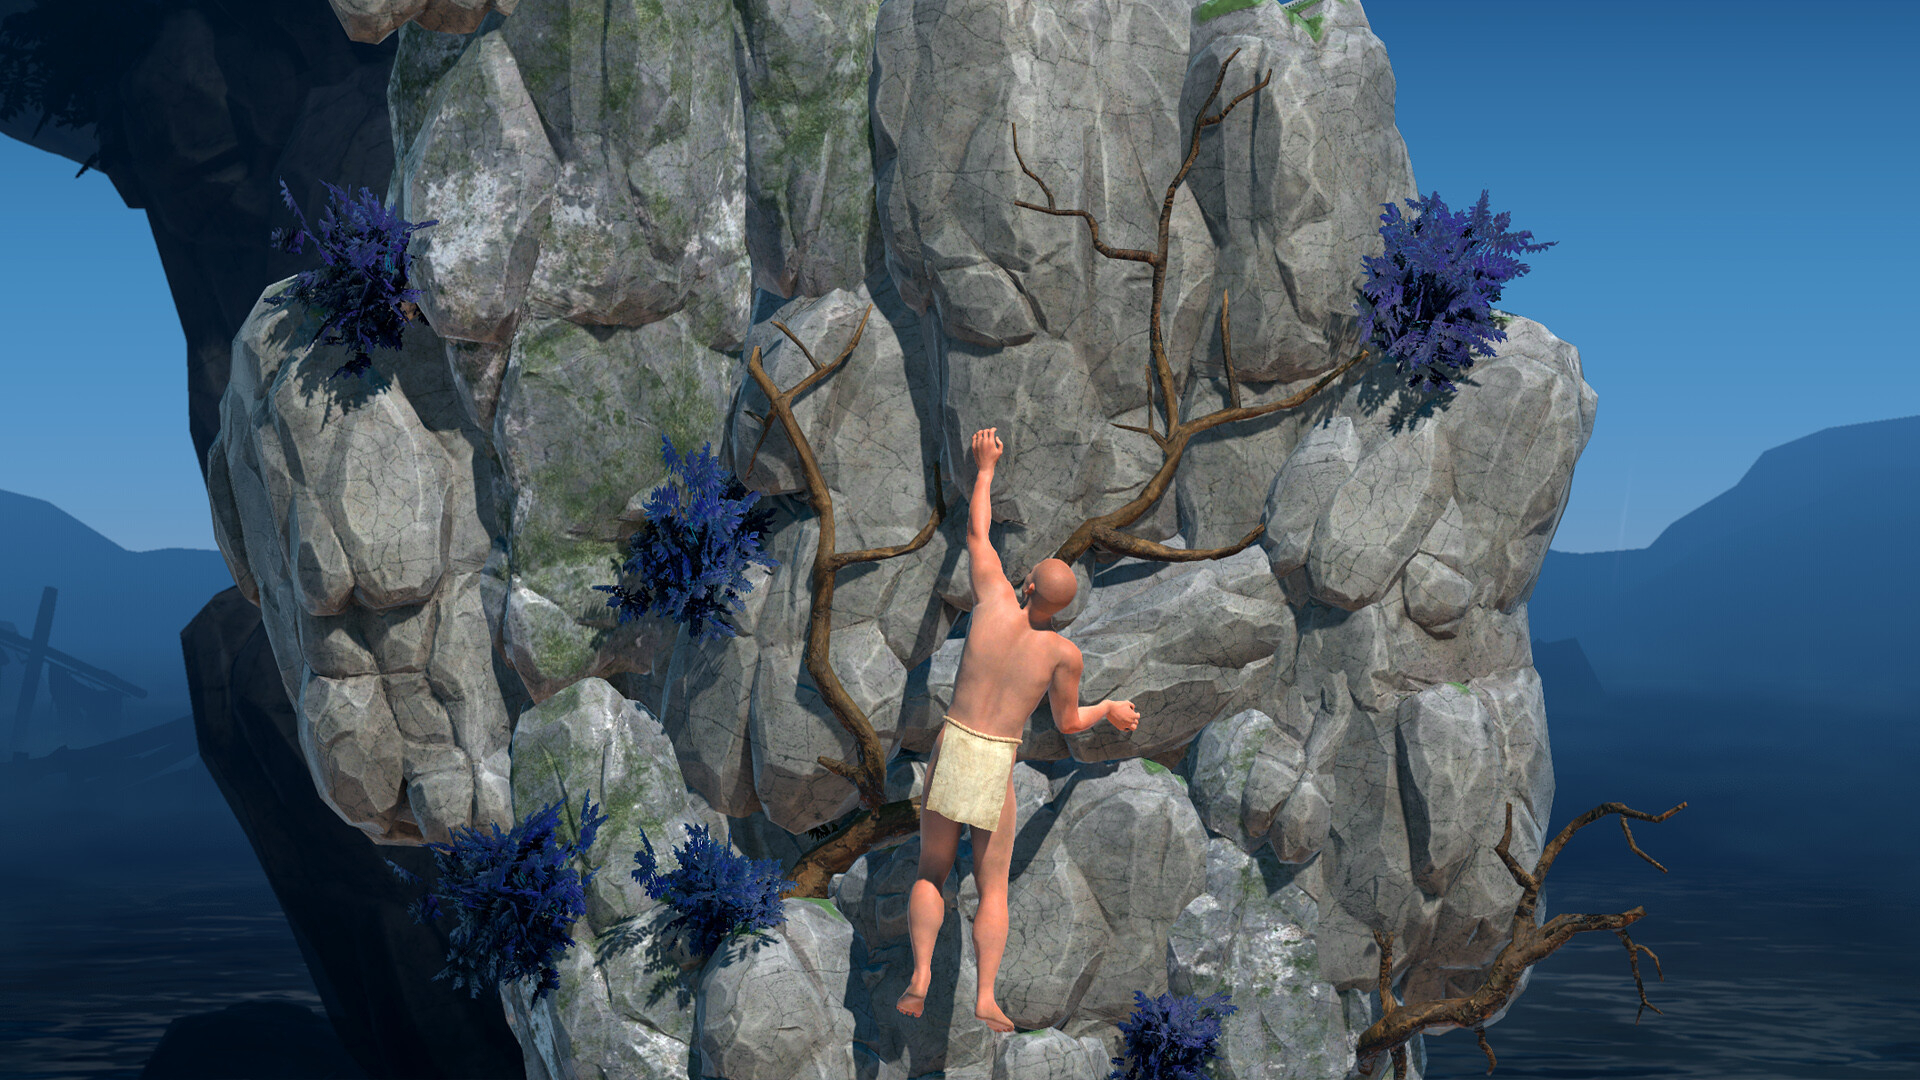 Купить a difficult game about climbing